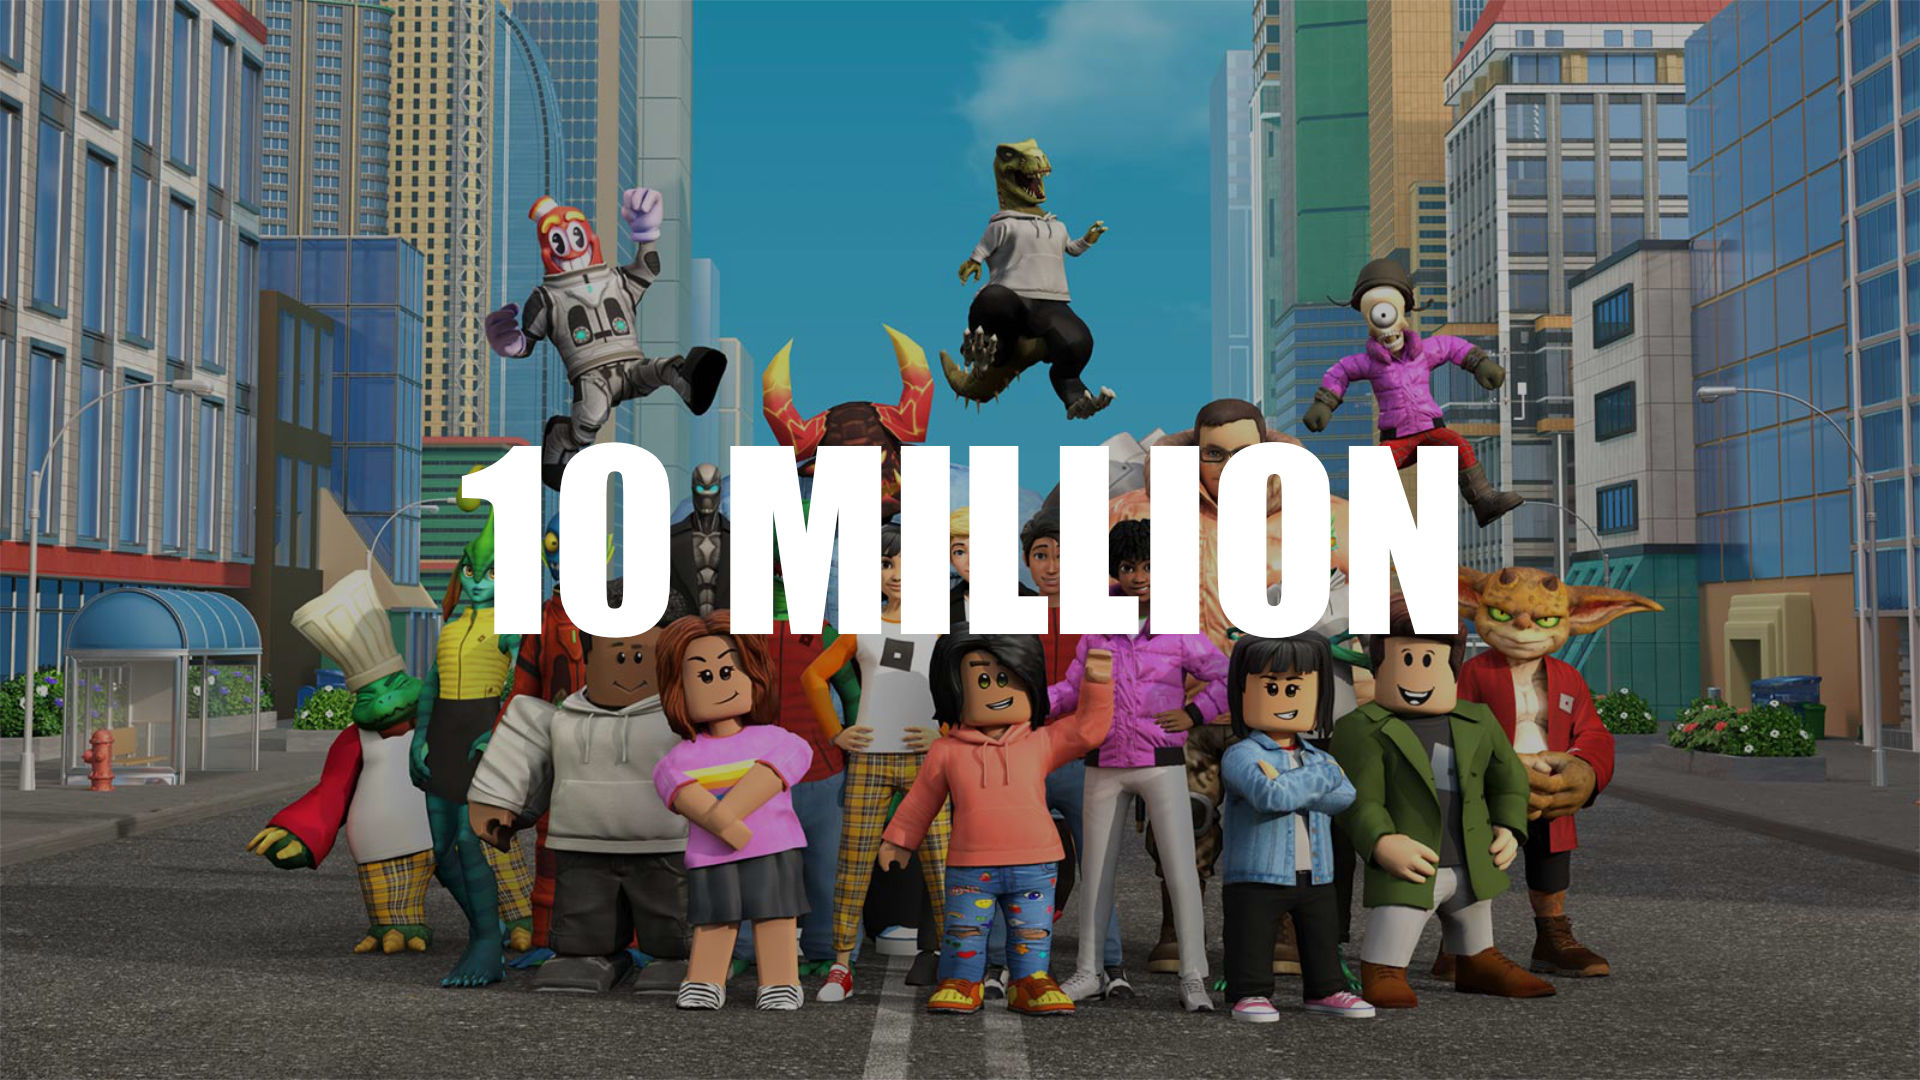 Roblox on PlayStation hits 10 million downloads in a week